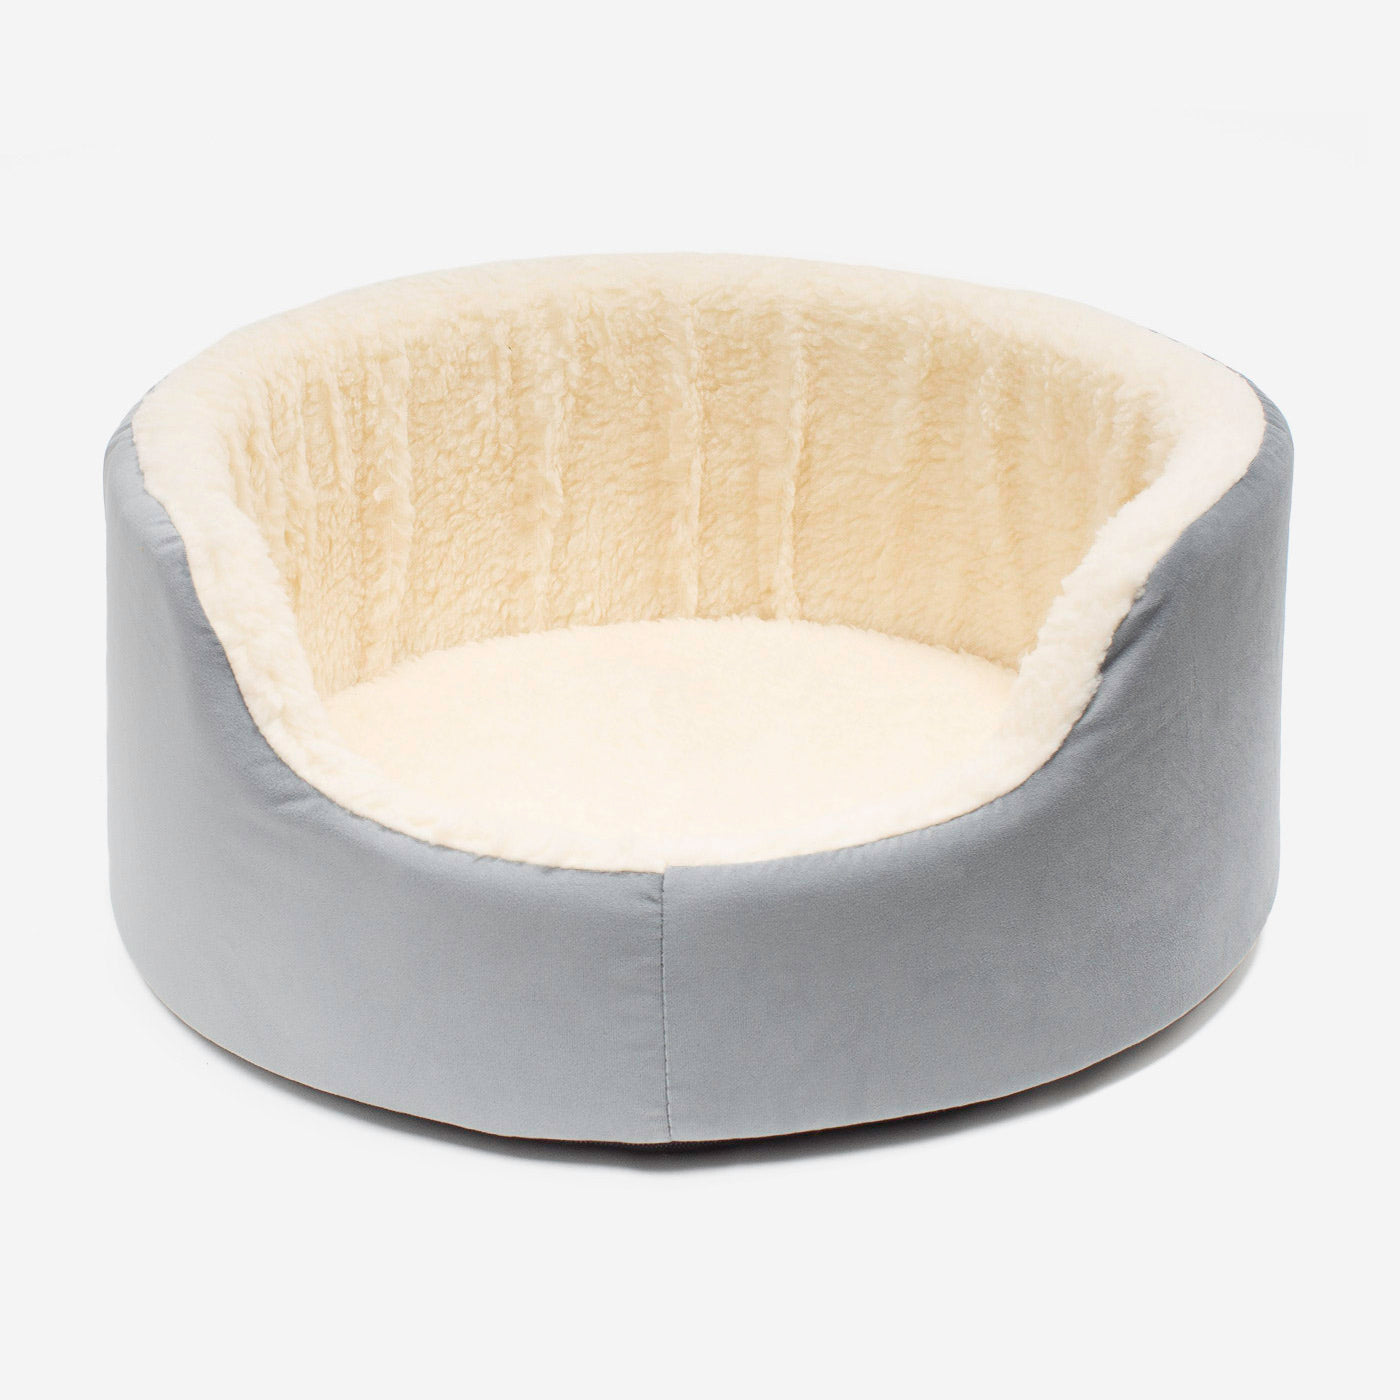 Discover our luxurious dog bed perfect for puppy growing! Crafted from plush sherpa, faux suede outer and complete with soft foam inner to present the ideal dog bed for puppies to grow! Available now at Lords & Labradors    